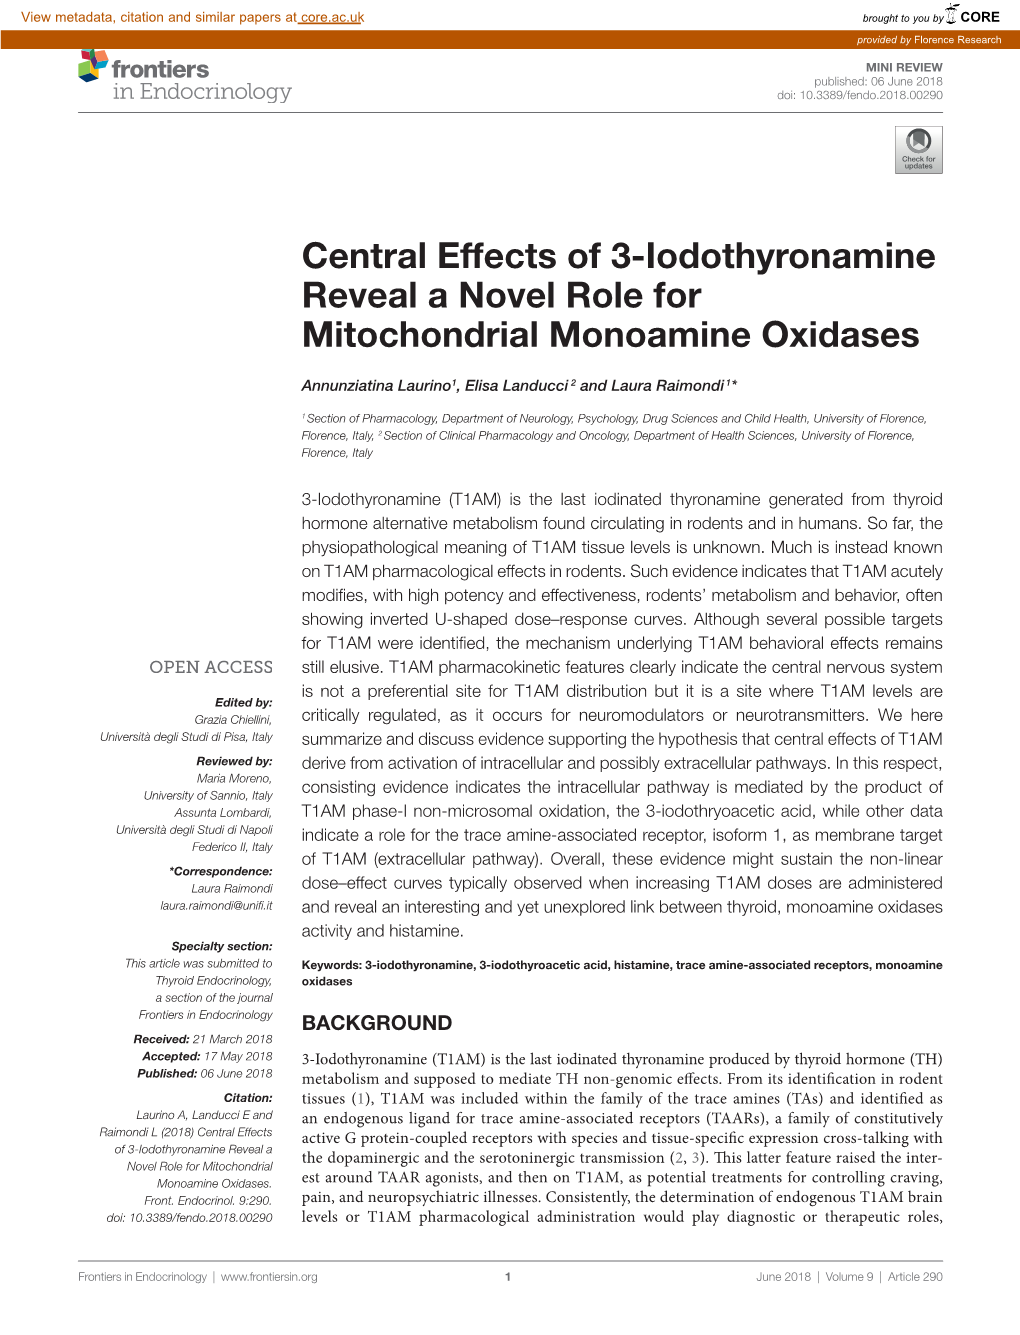 Central Effects of 3-Iodothyronamine Reveal a Novel Role for Mitochondrial Monoamine Oxidases